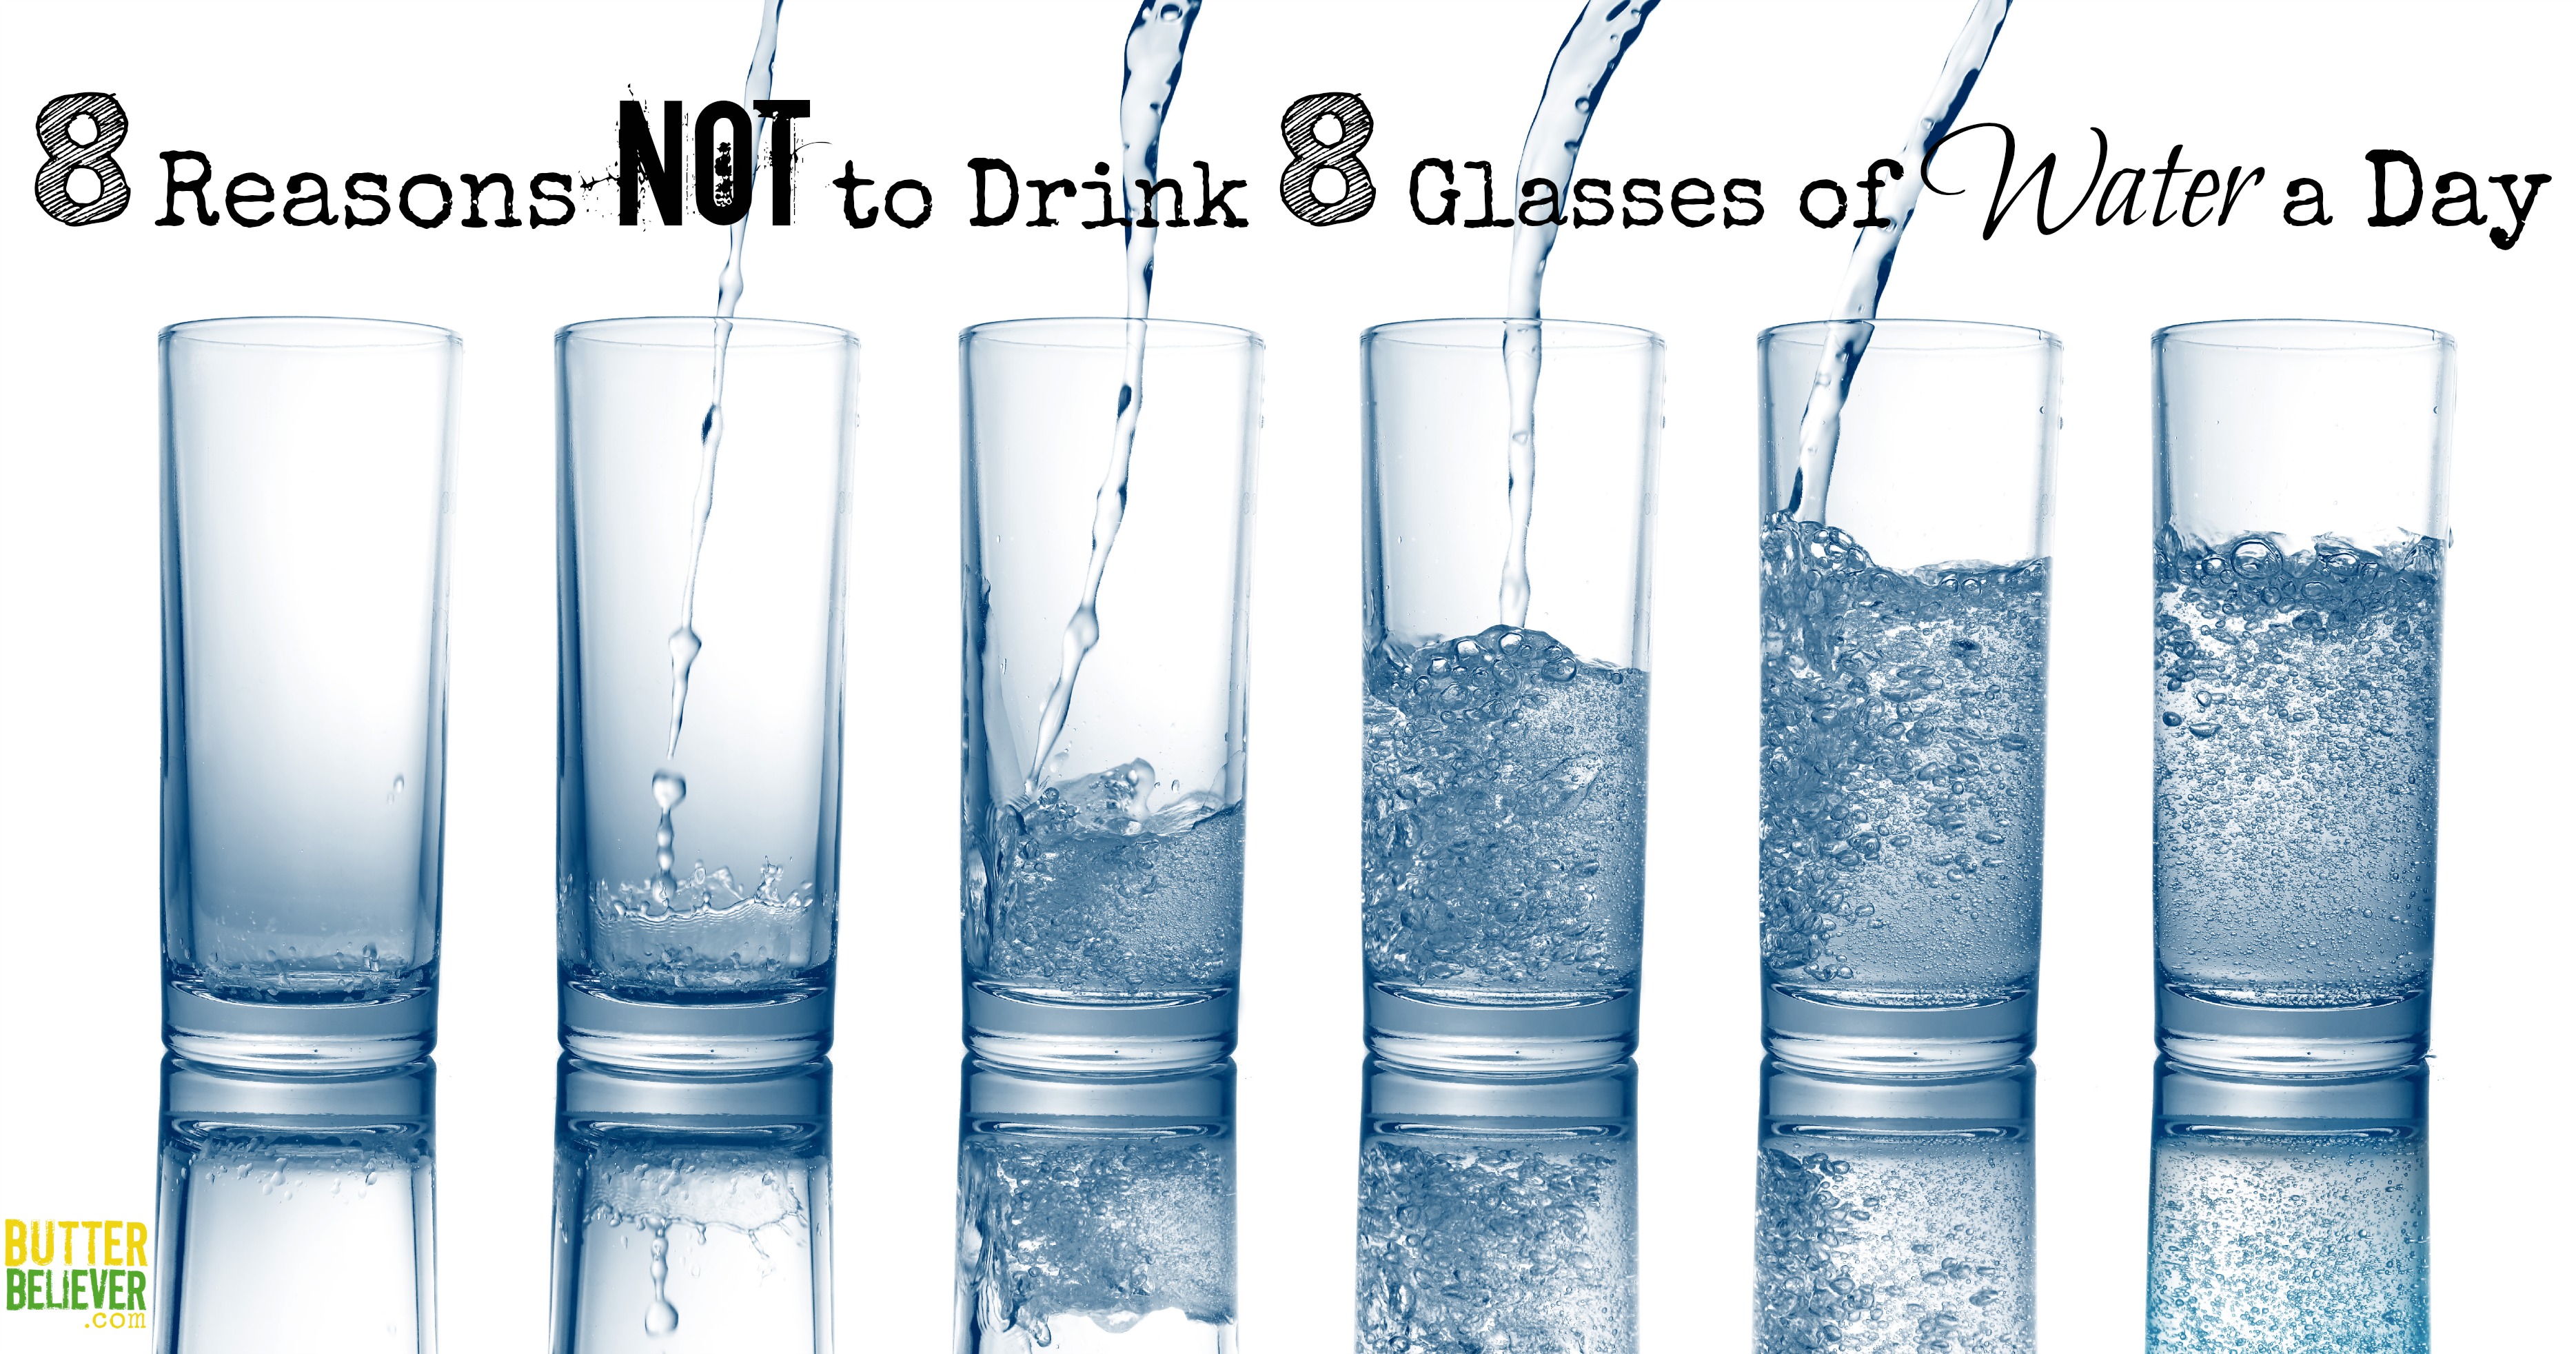 8 reasons not to drink 8 glasses of water a day - butter believer